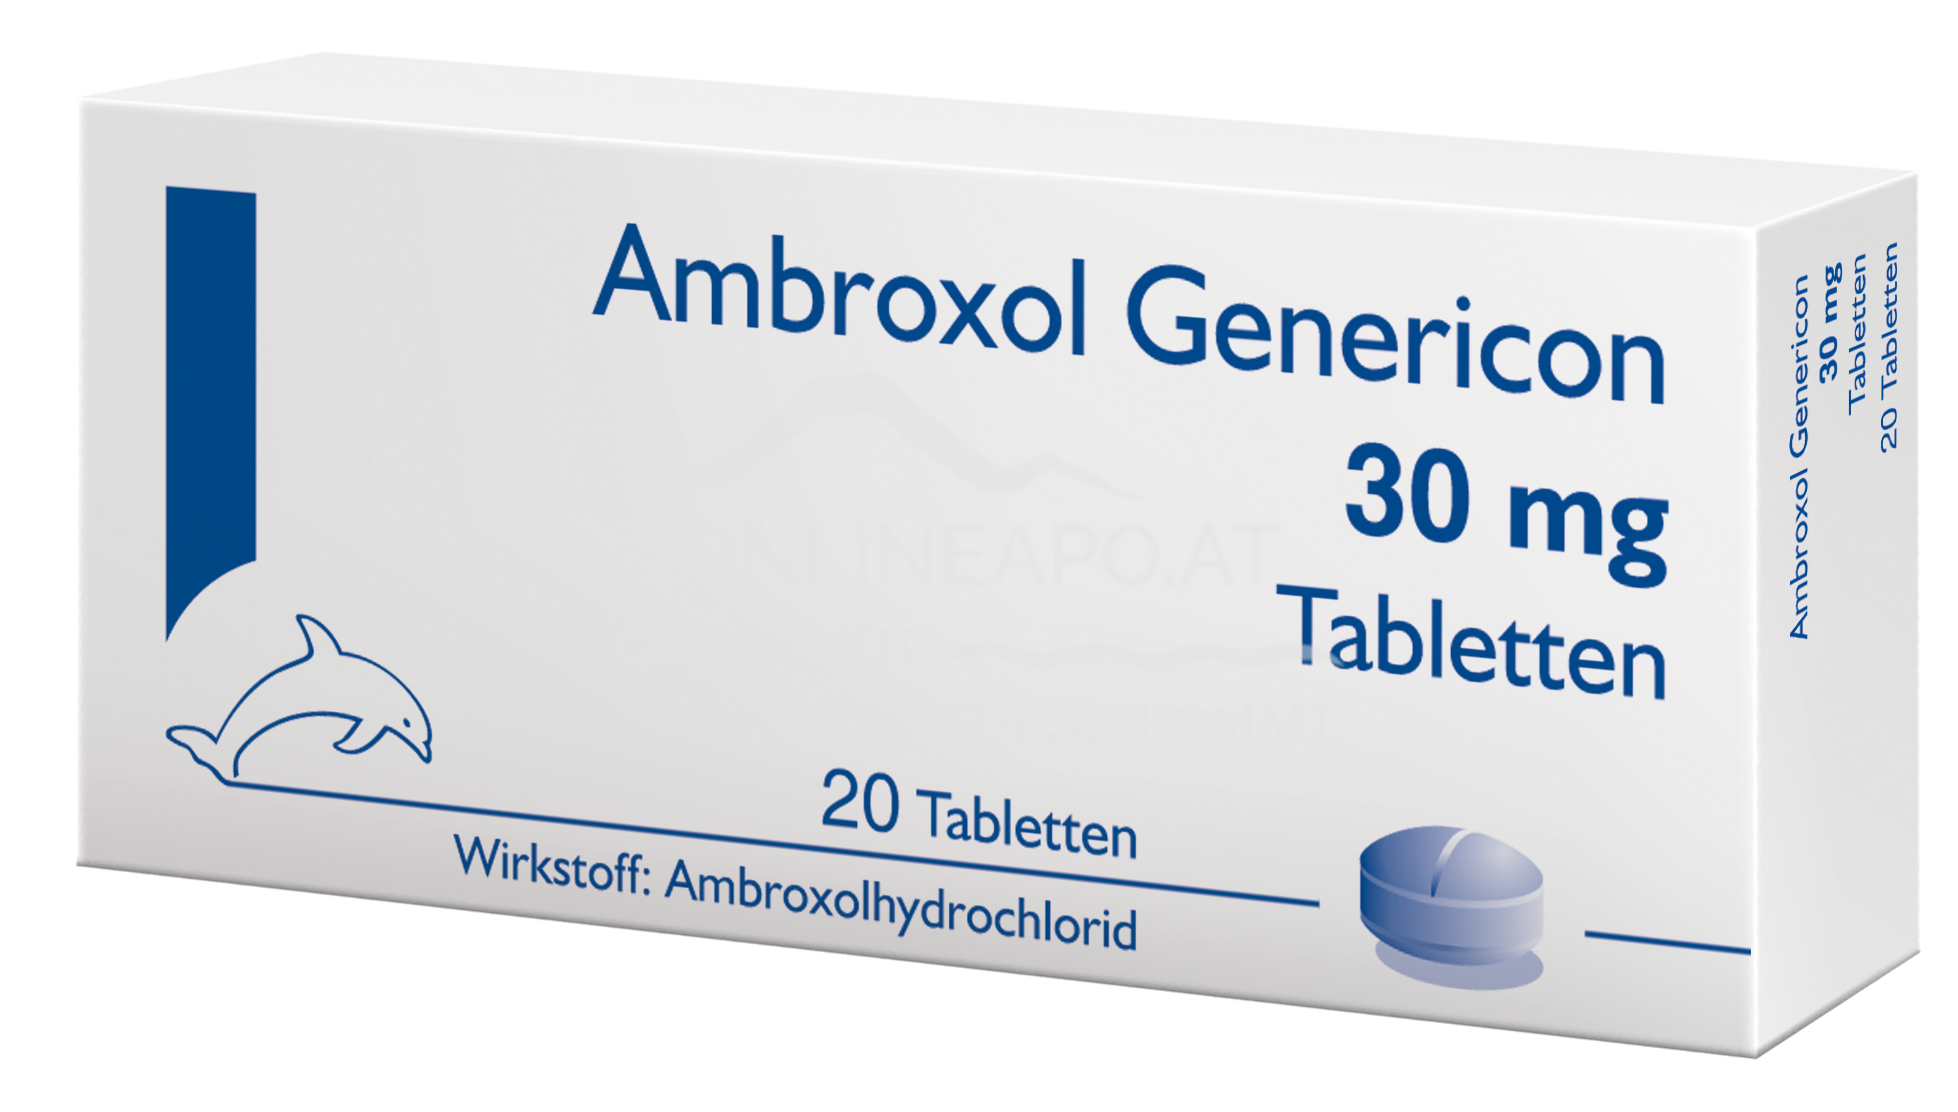 Ambroxol Genericon 30 mg Tabletten